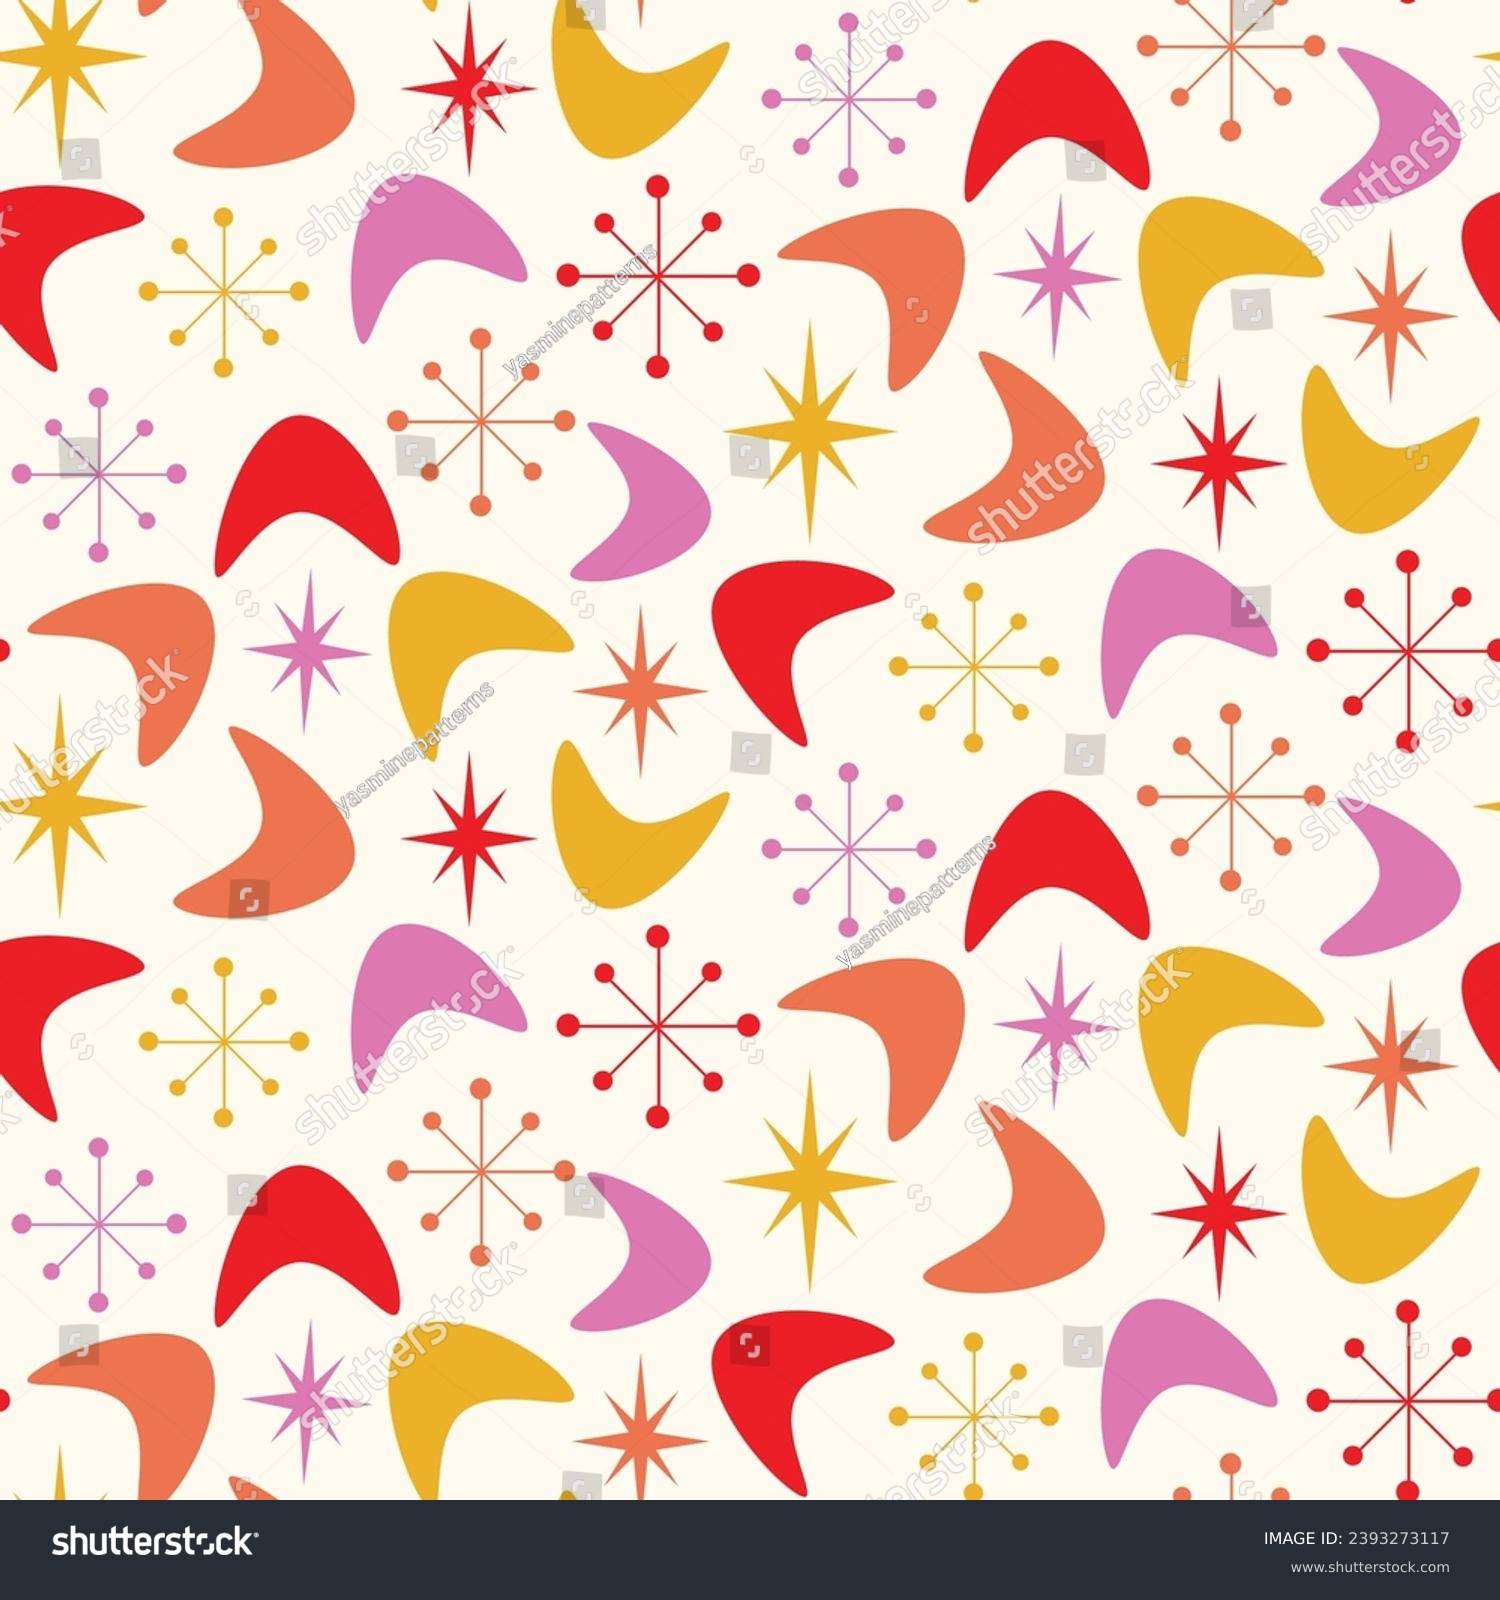 SVG of Mid Century Modern Boomerang seamless pattern with atomic retro starbursts in orange, red, pink and yellow on white background. For home decor, textile, wallpaper and fabric. svg